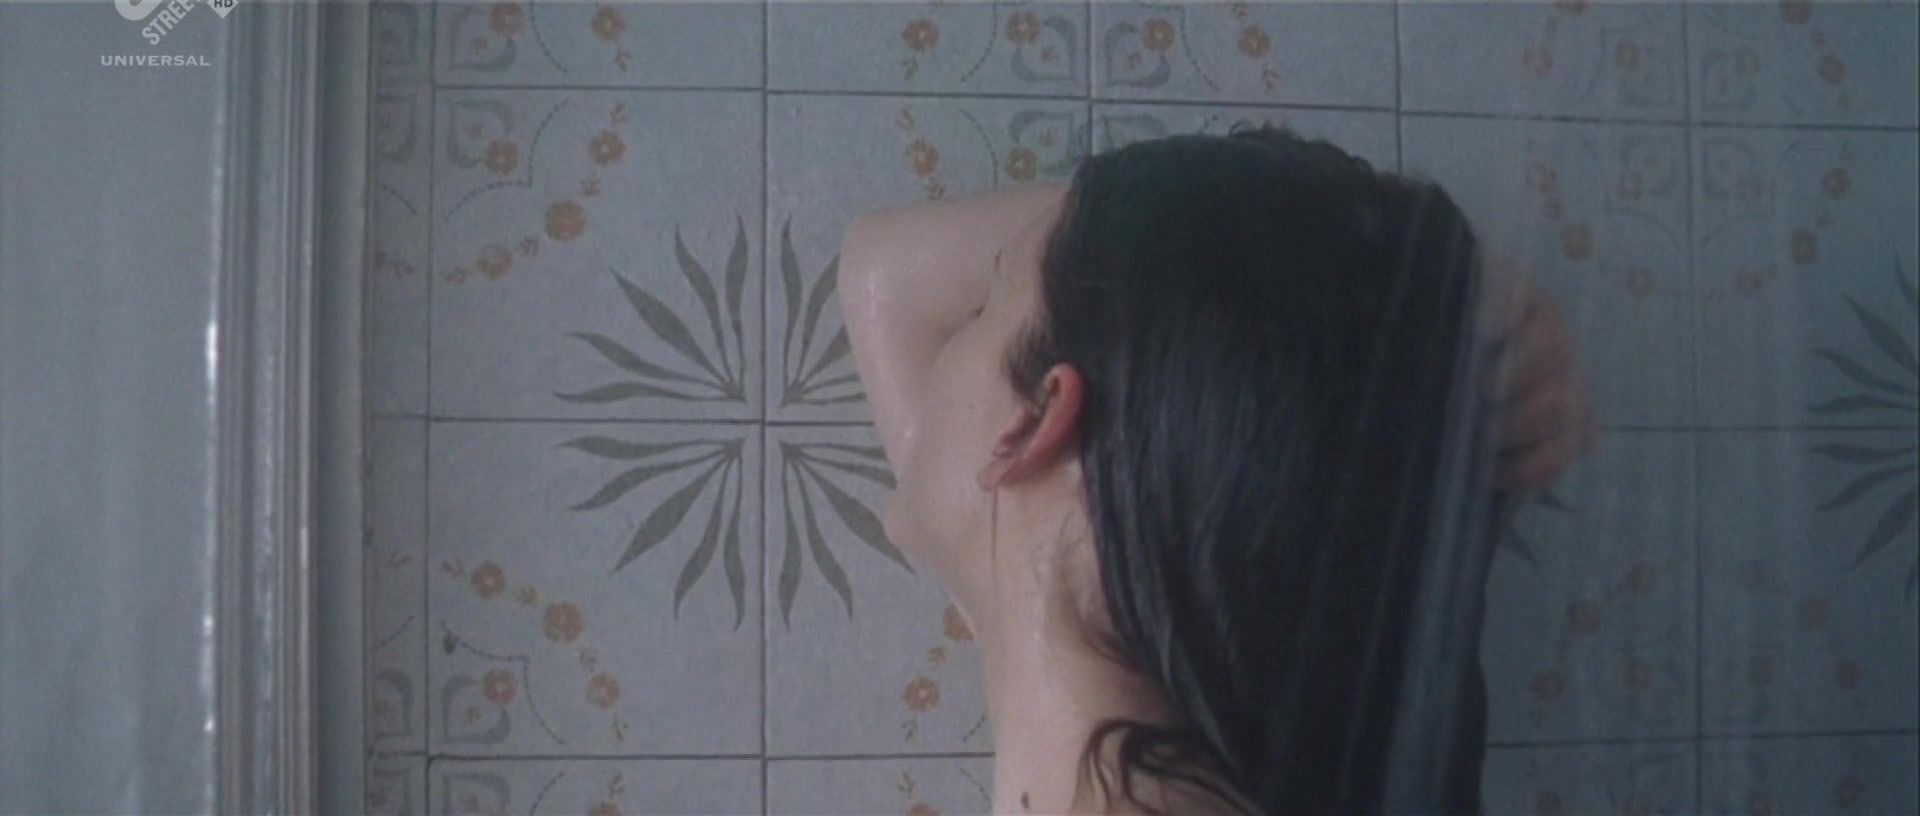 Transvestite Topless Melanie Laurent from Shower Video of the French movie "La chambre des morts" Guyonshemale